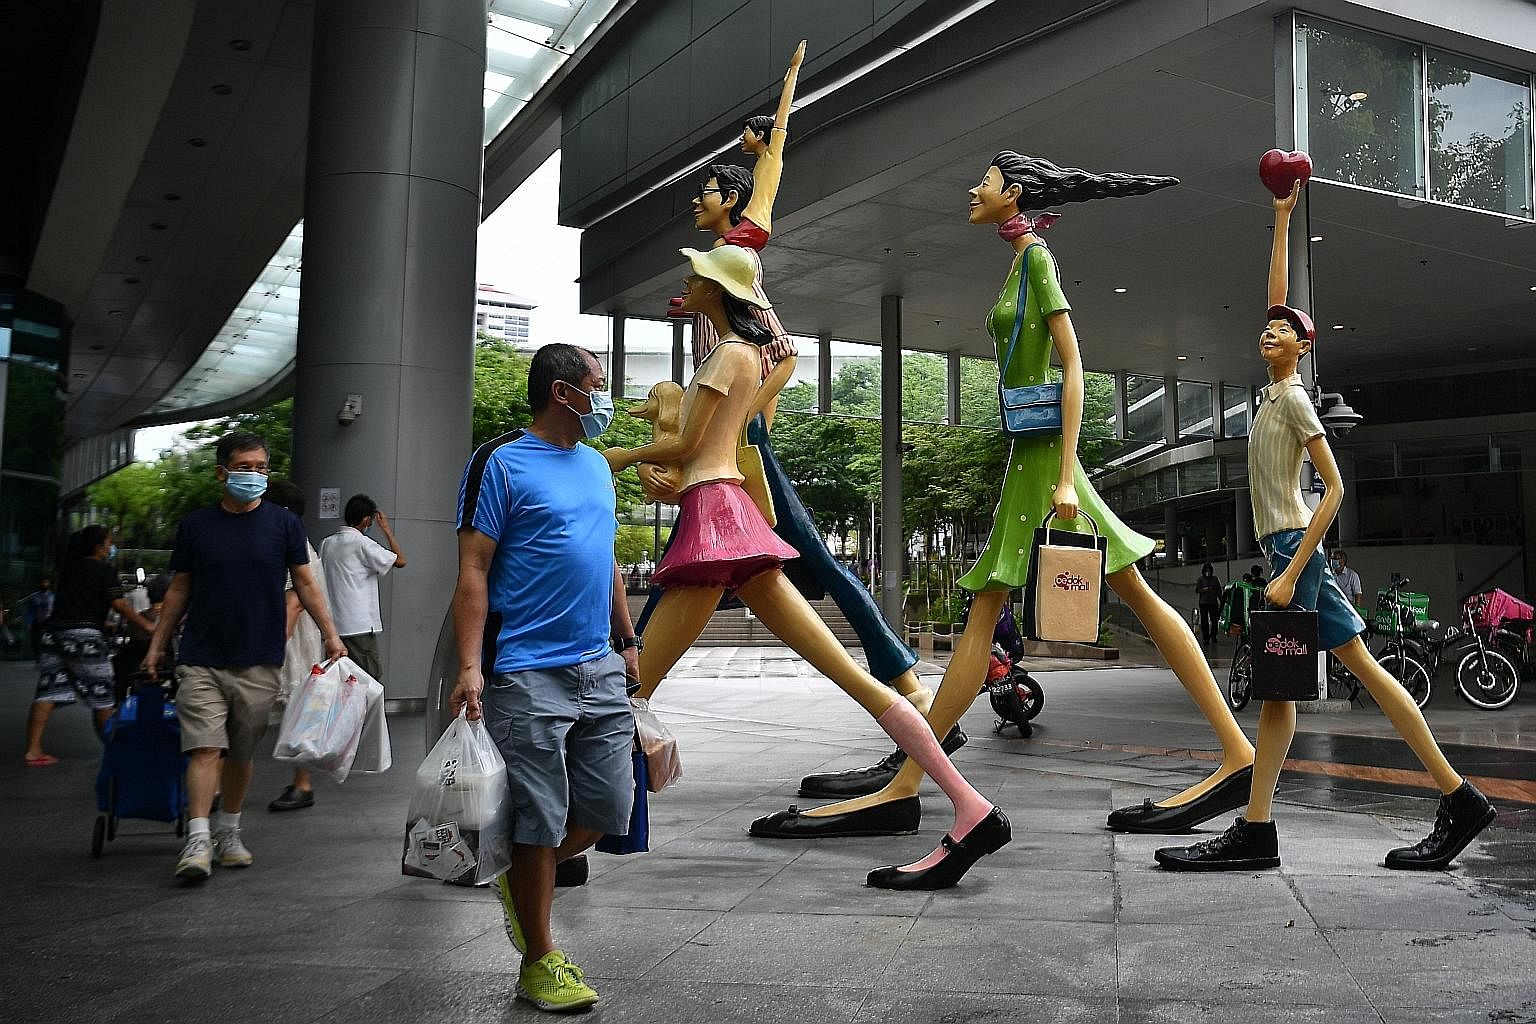 Shoppers outside Bedok Mall last week. With shops and food and beverage (F&B) dine-in set to reopen soon, retail real estate investment trusts such as CapitaLand Mall Trust, Frasers Centrepoint Trust, Lendlease and F&B stocks Koufu and Jumbo will ben